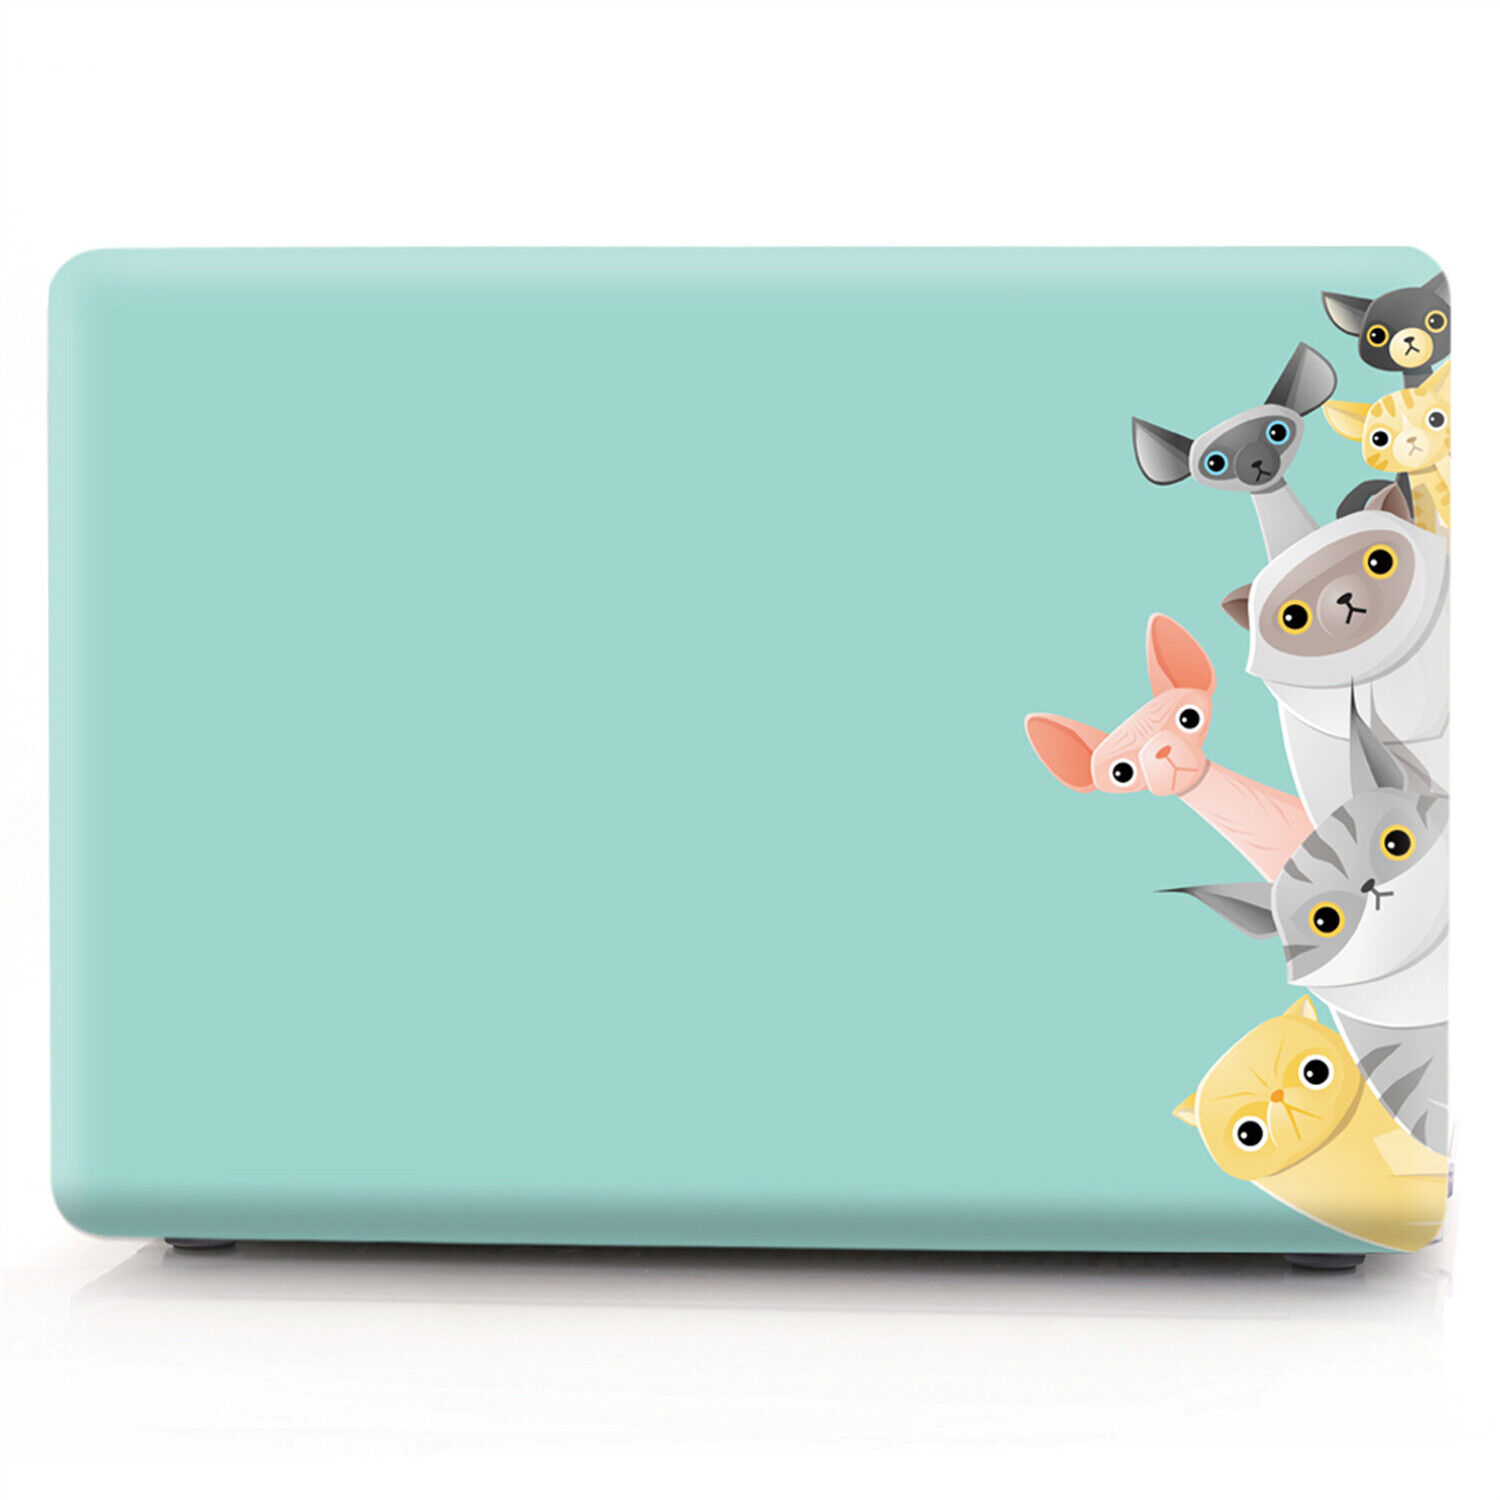 Cute Animal Hard Shell Skin Case Cover For MacBook Pro 15 16 14 Air 11 13 Retina